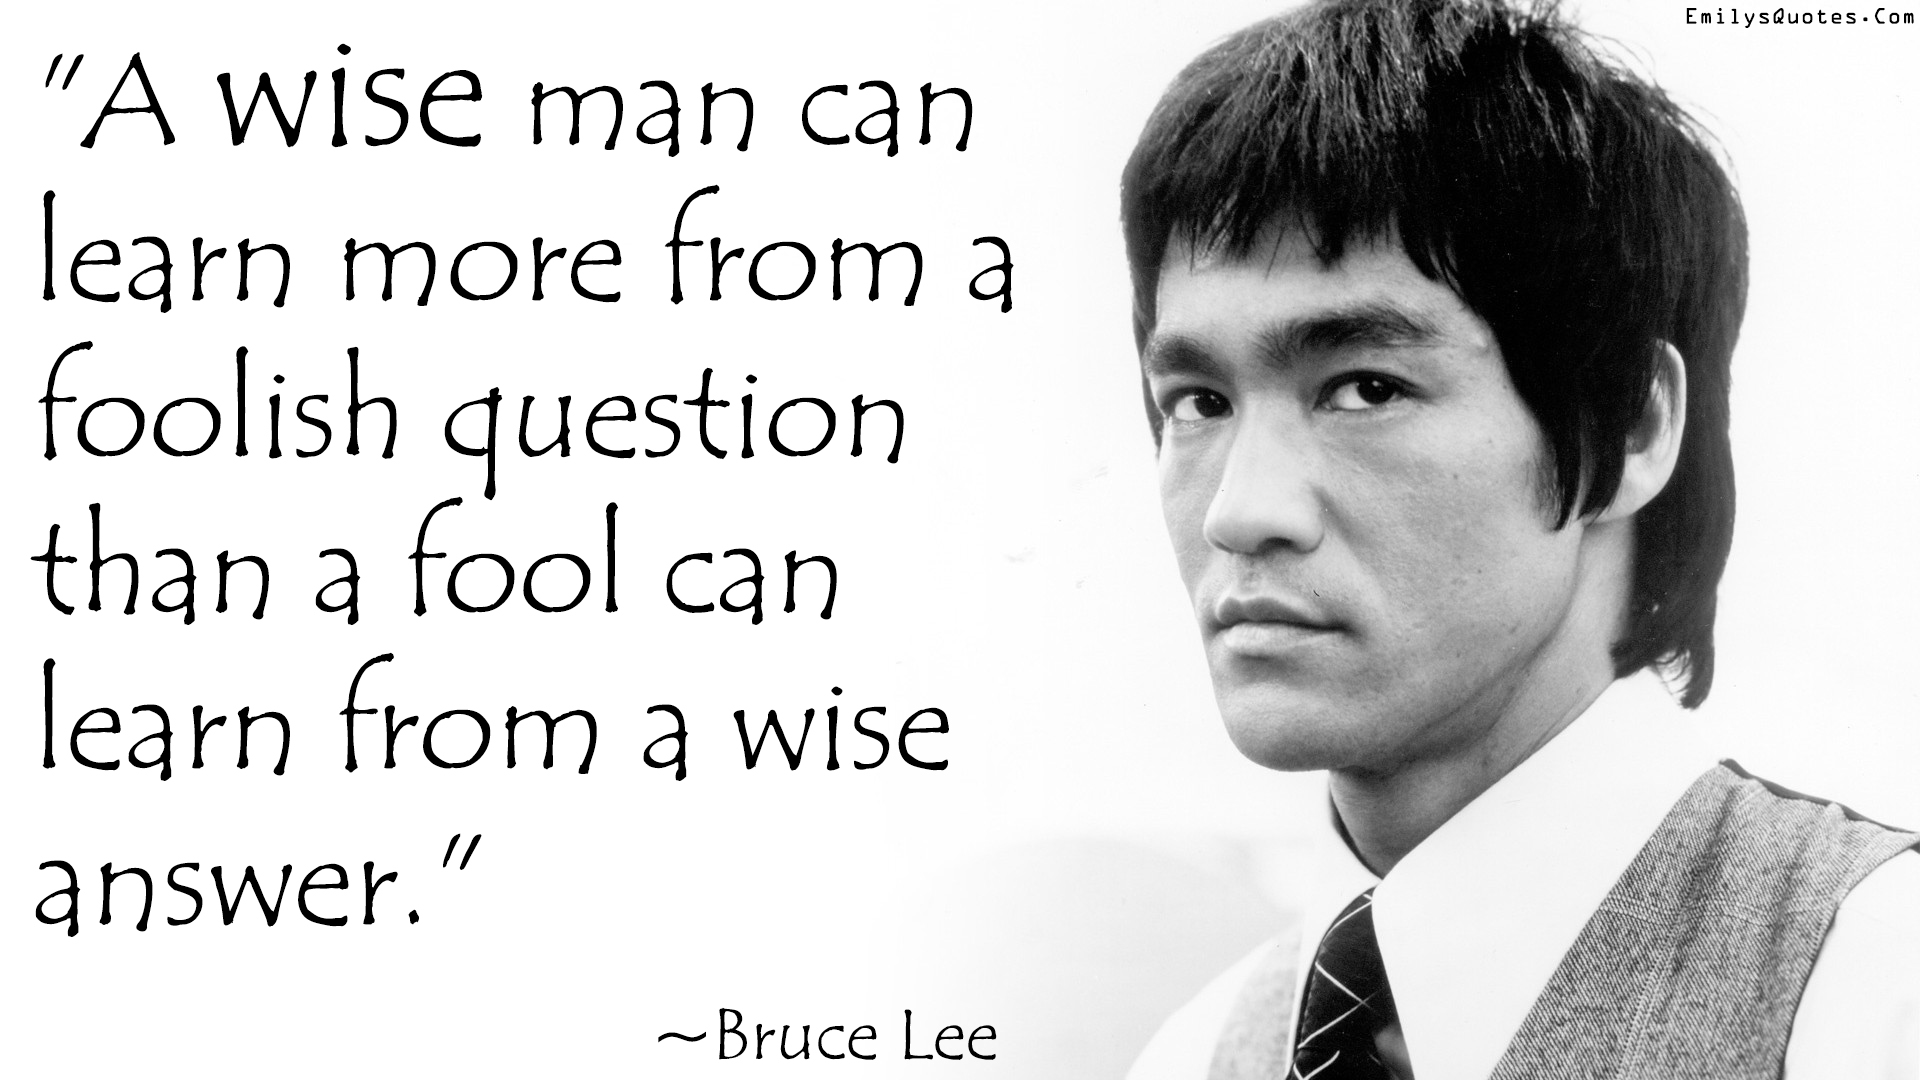 A wise man can learn more from a foolish question than a fool can learn from a wise answer